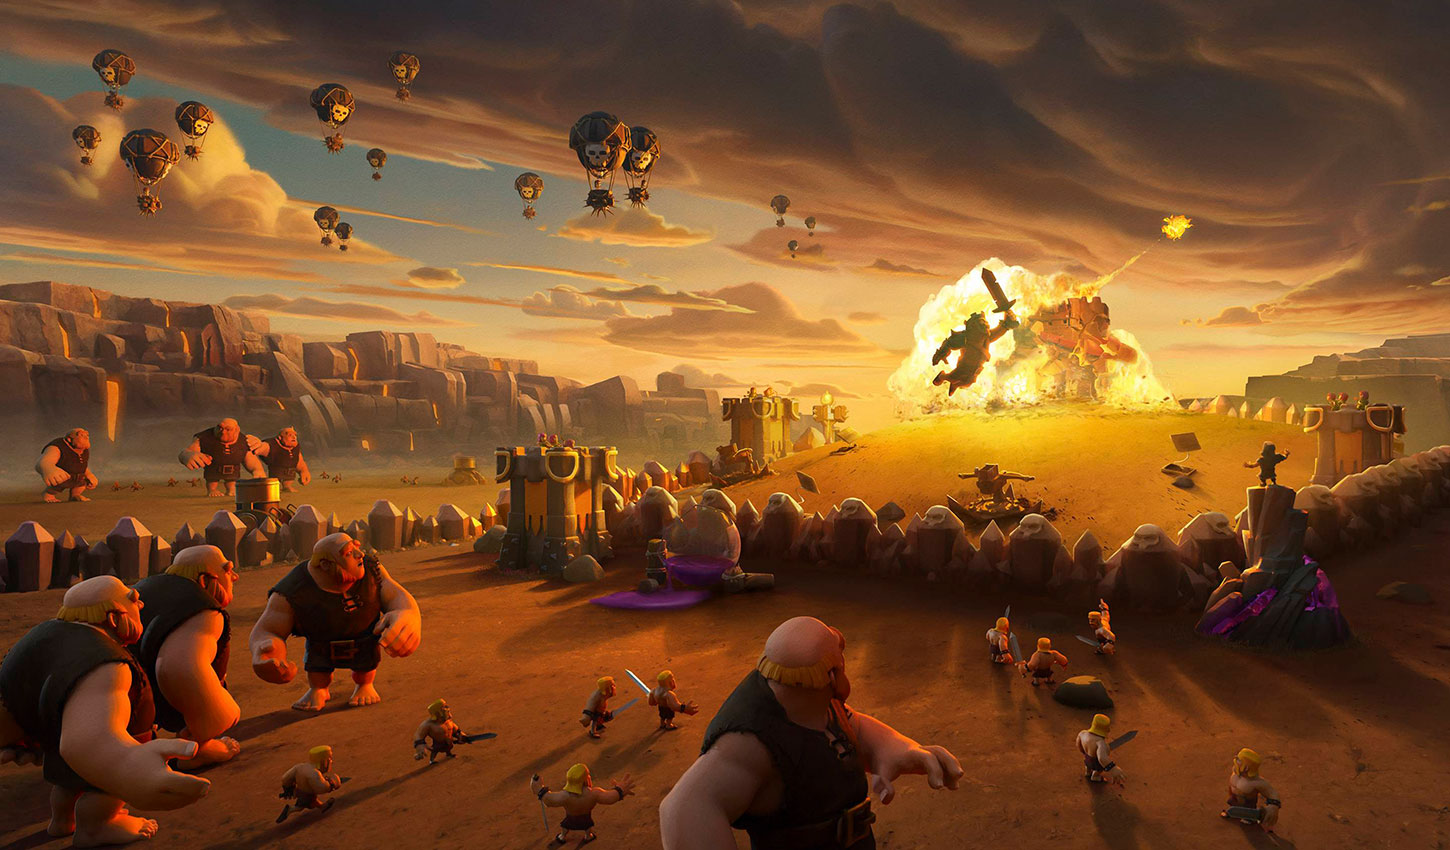 Clash of Clans Grossed $727 Million in Revenue in 2019, a 27% Increase Over 2018